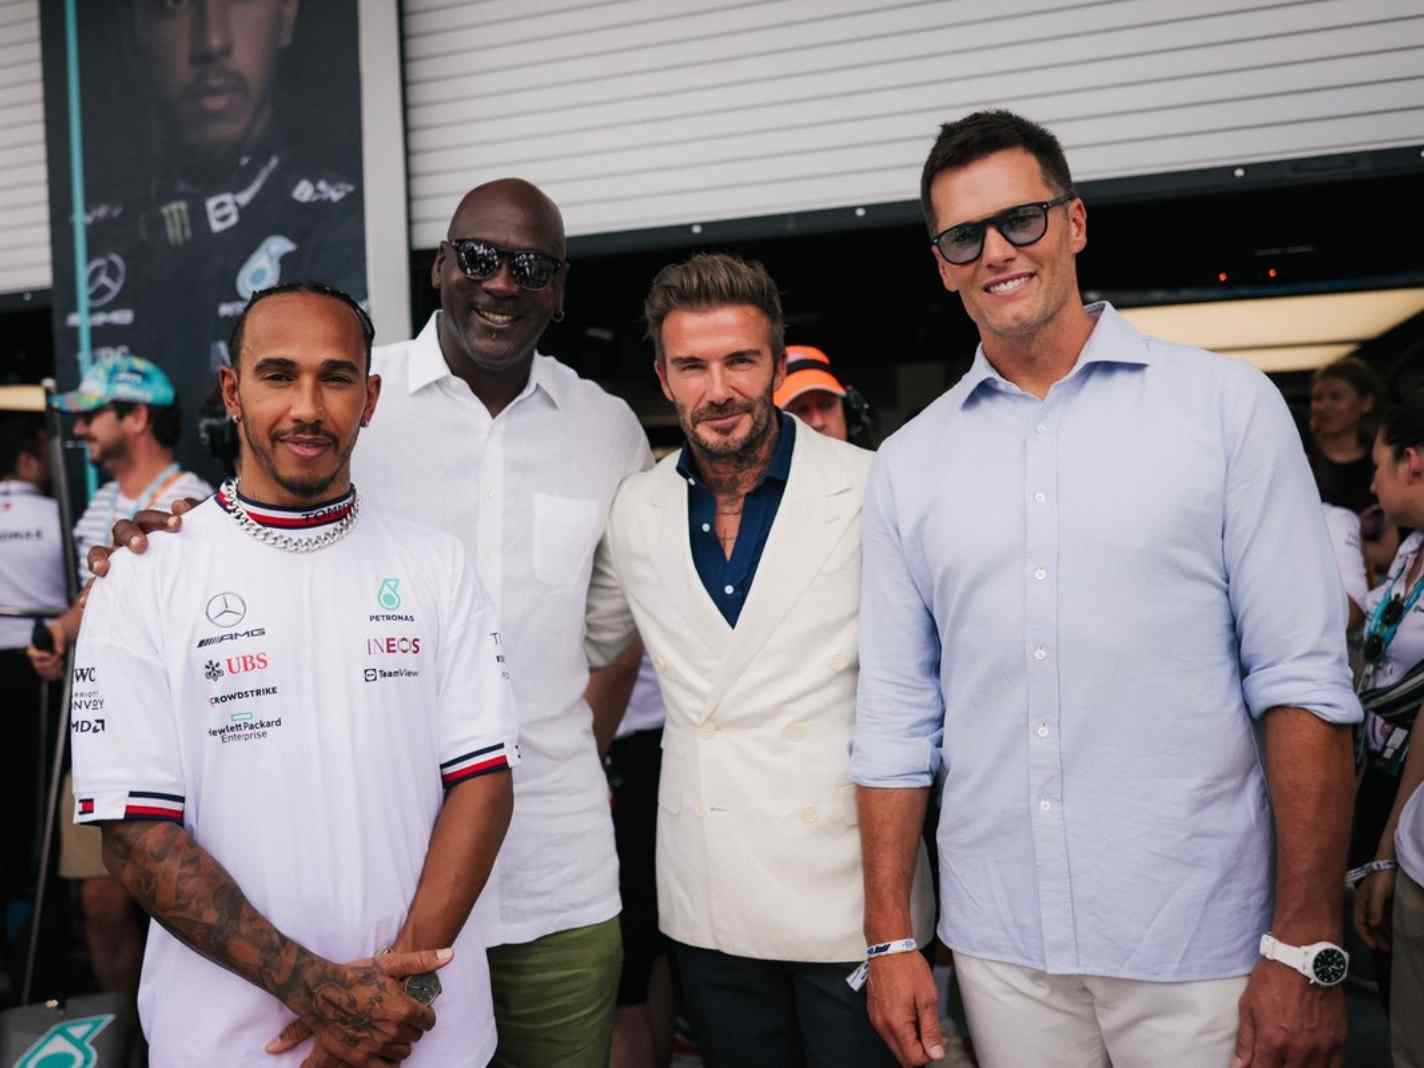 GOAT Central: David Beckham features in an iconic sports photo at Miami GP